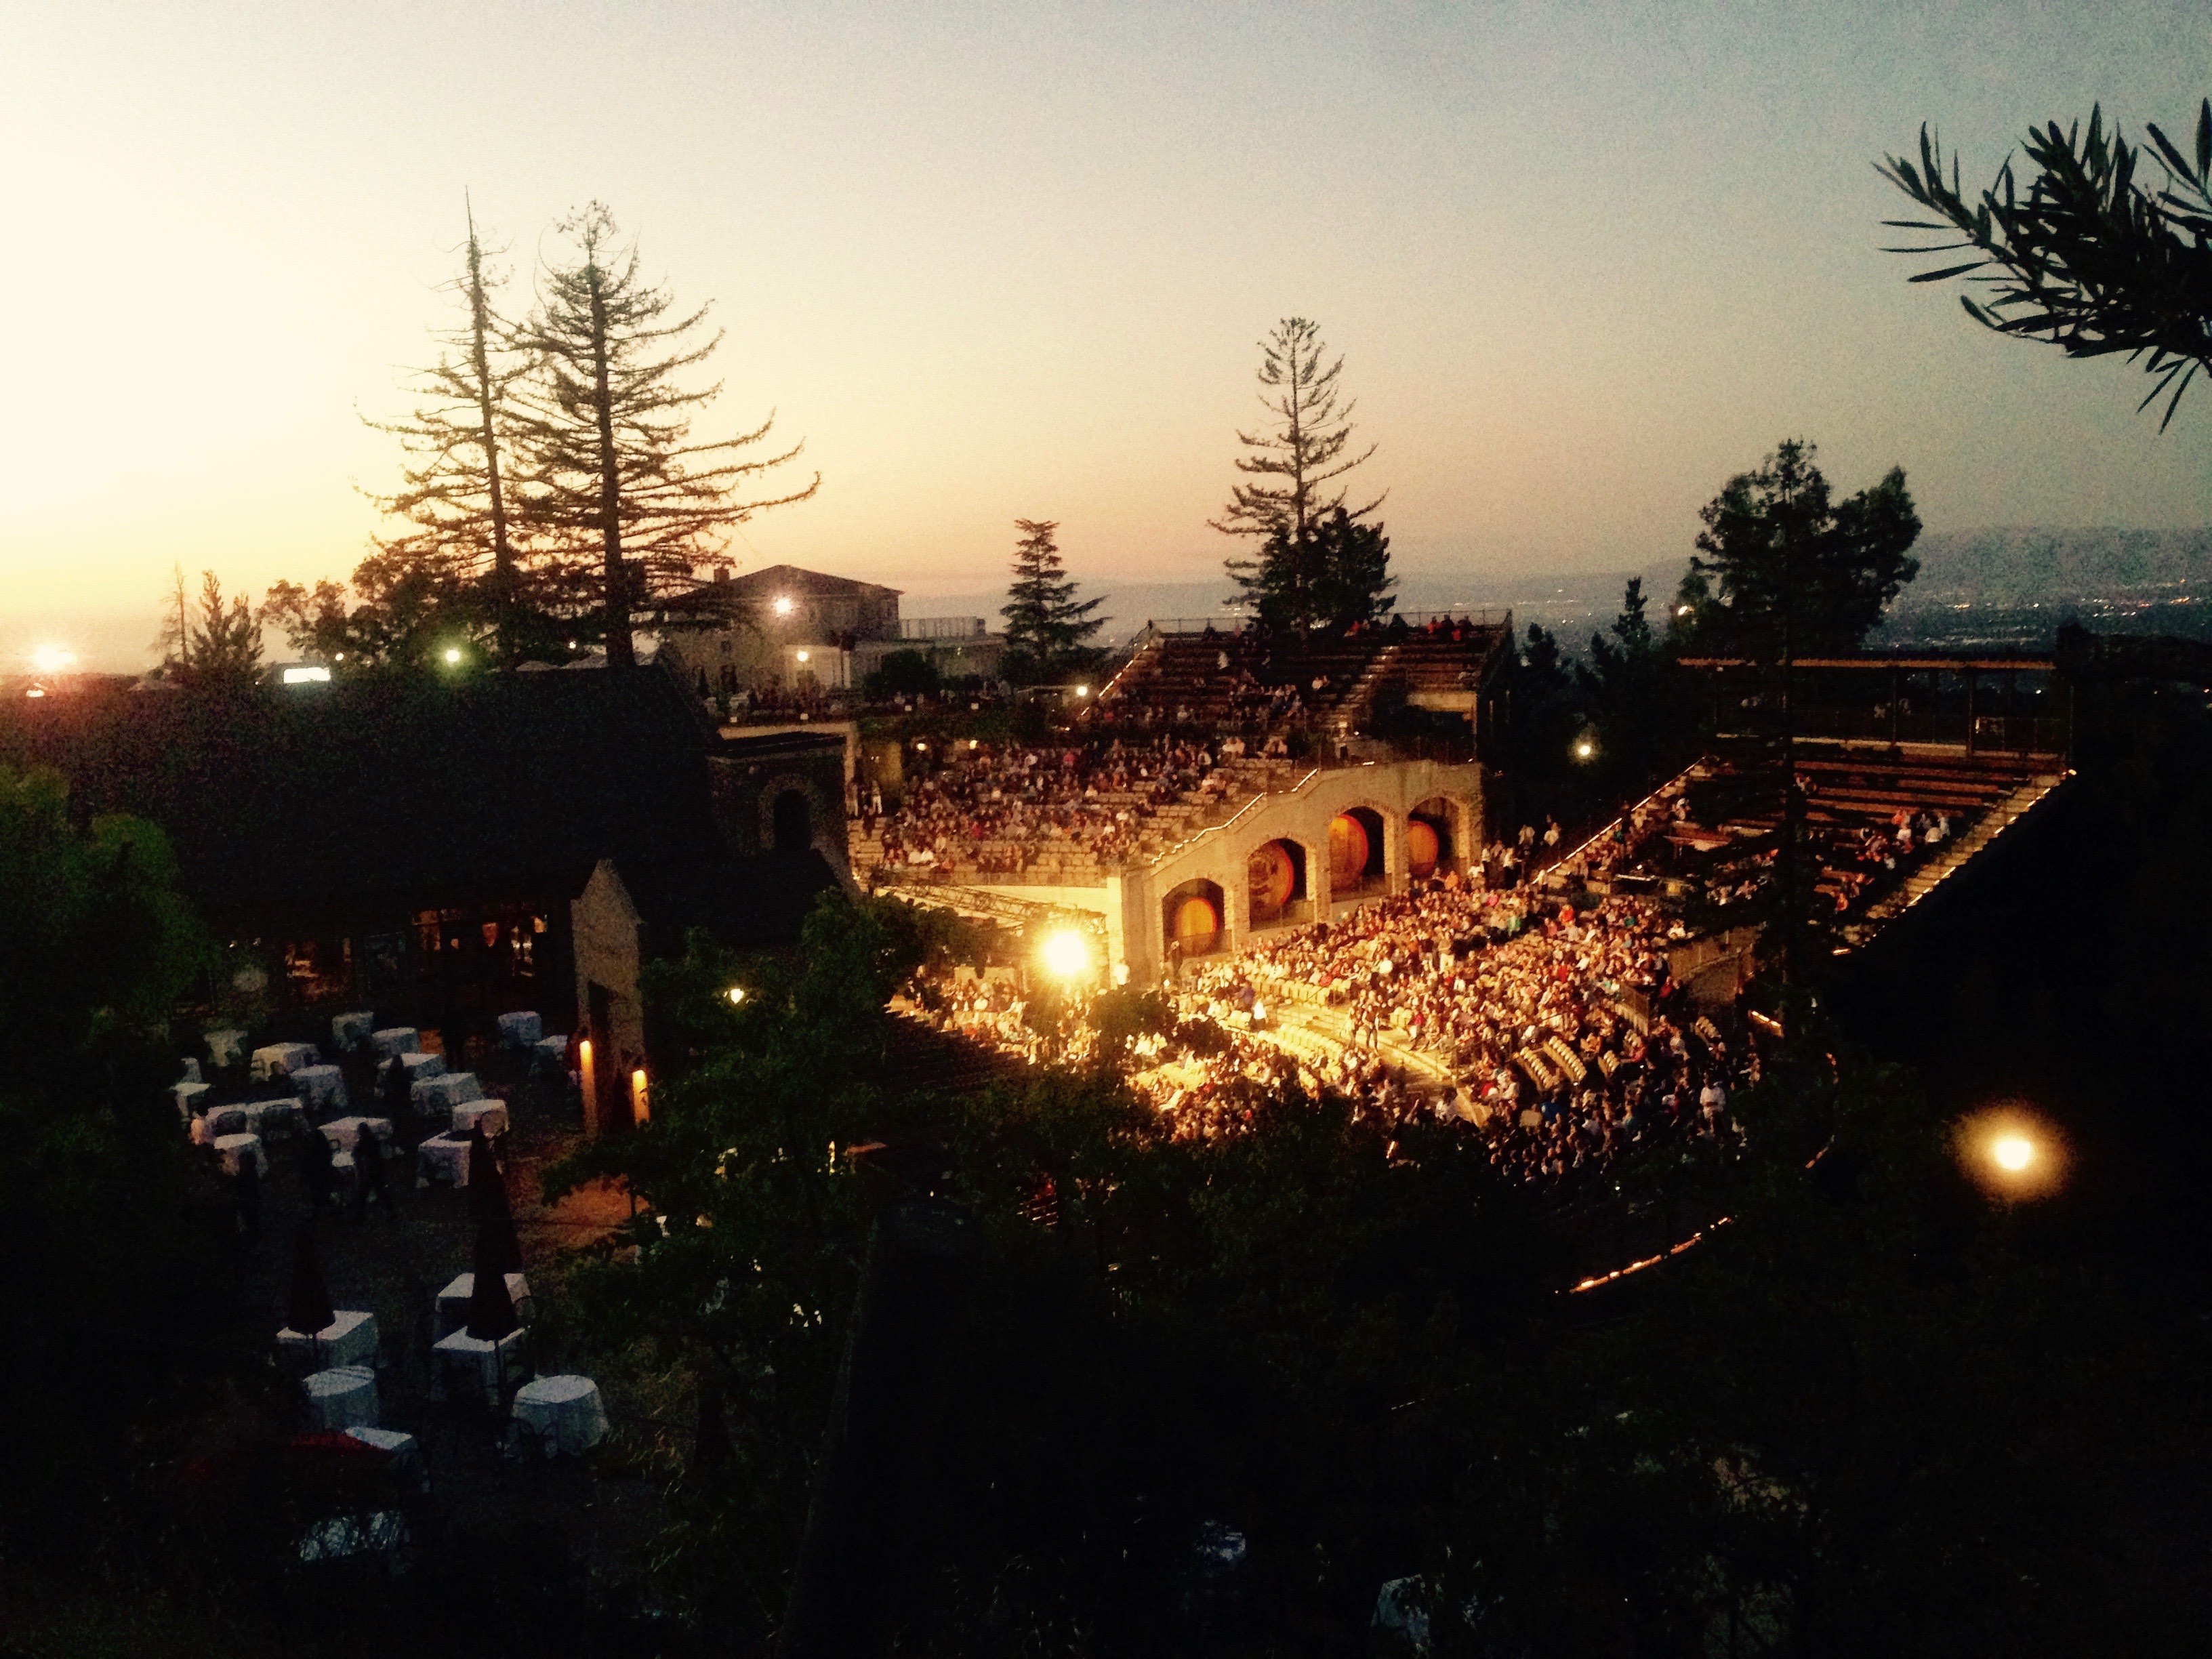 View of the Mountain Winery outdoor amphitheatre